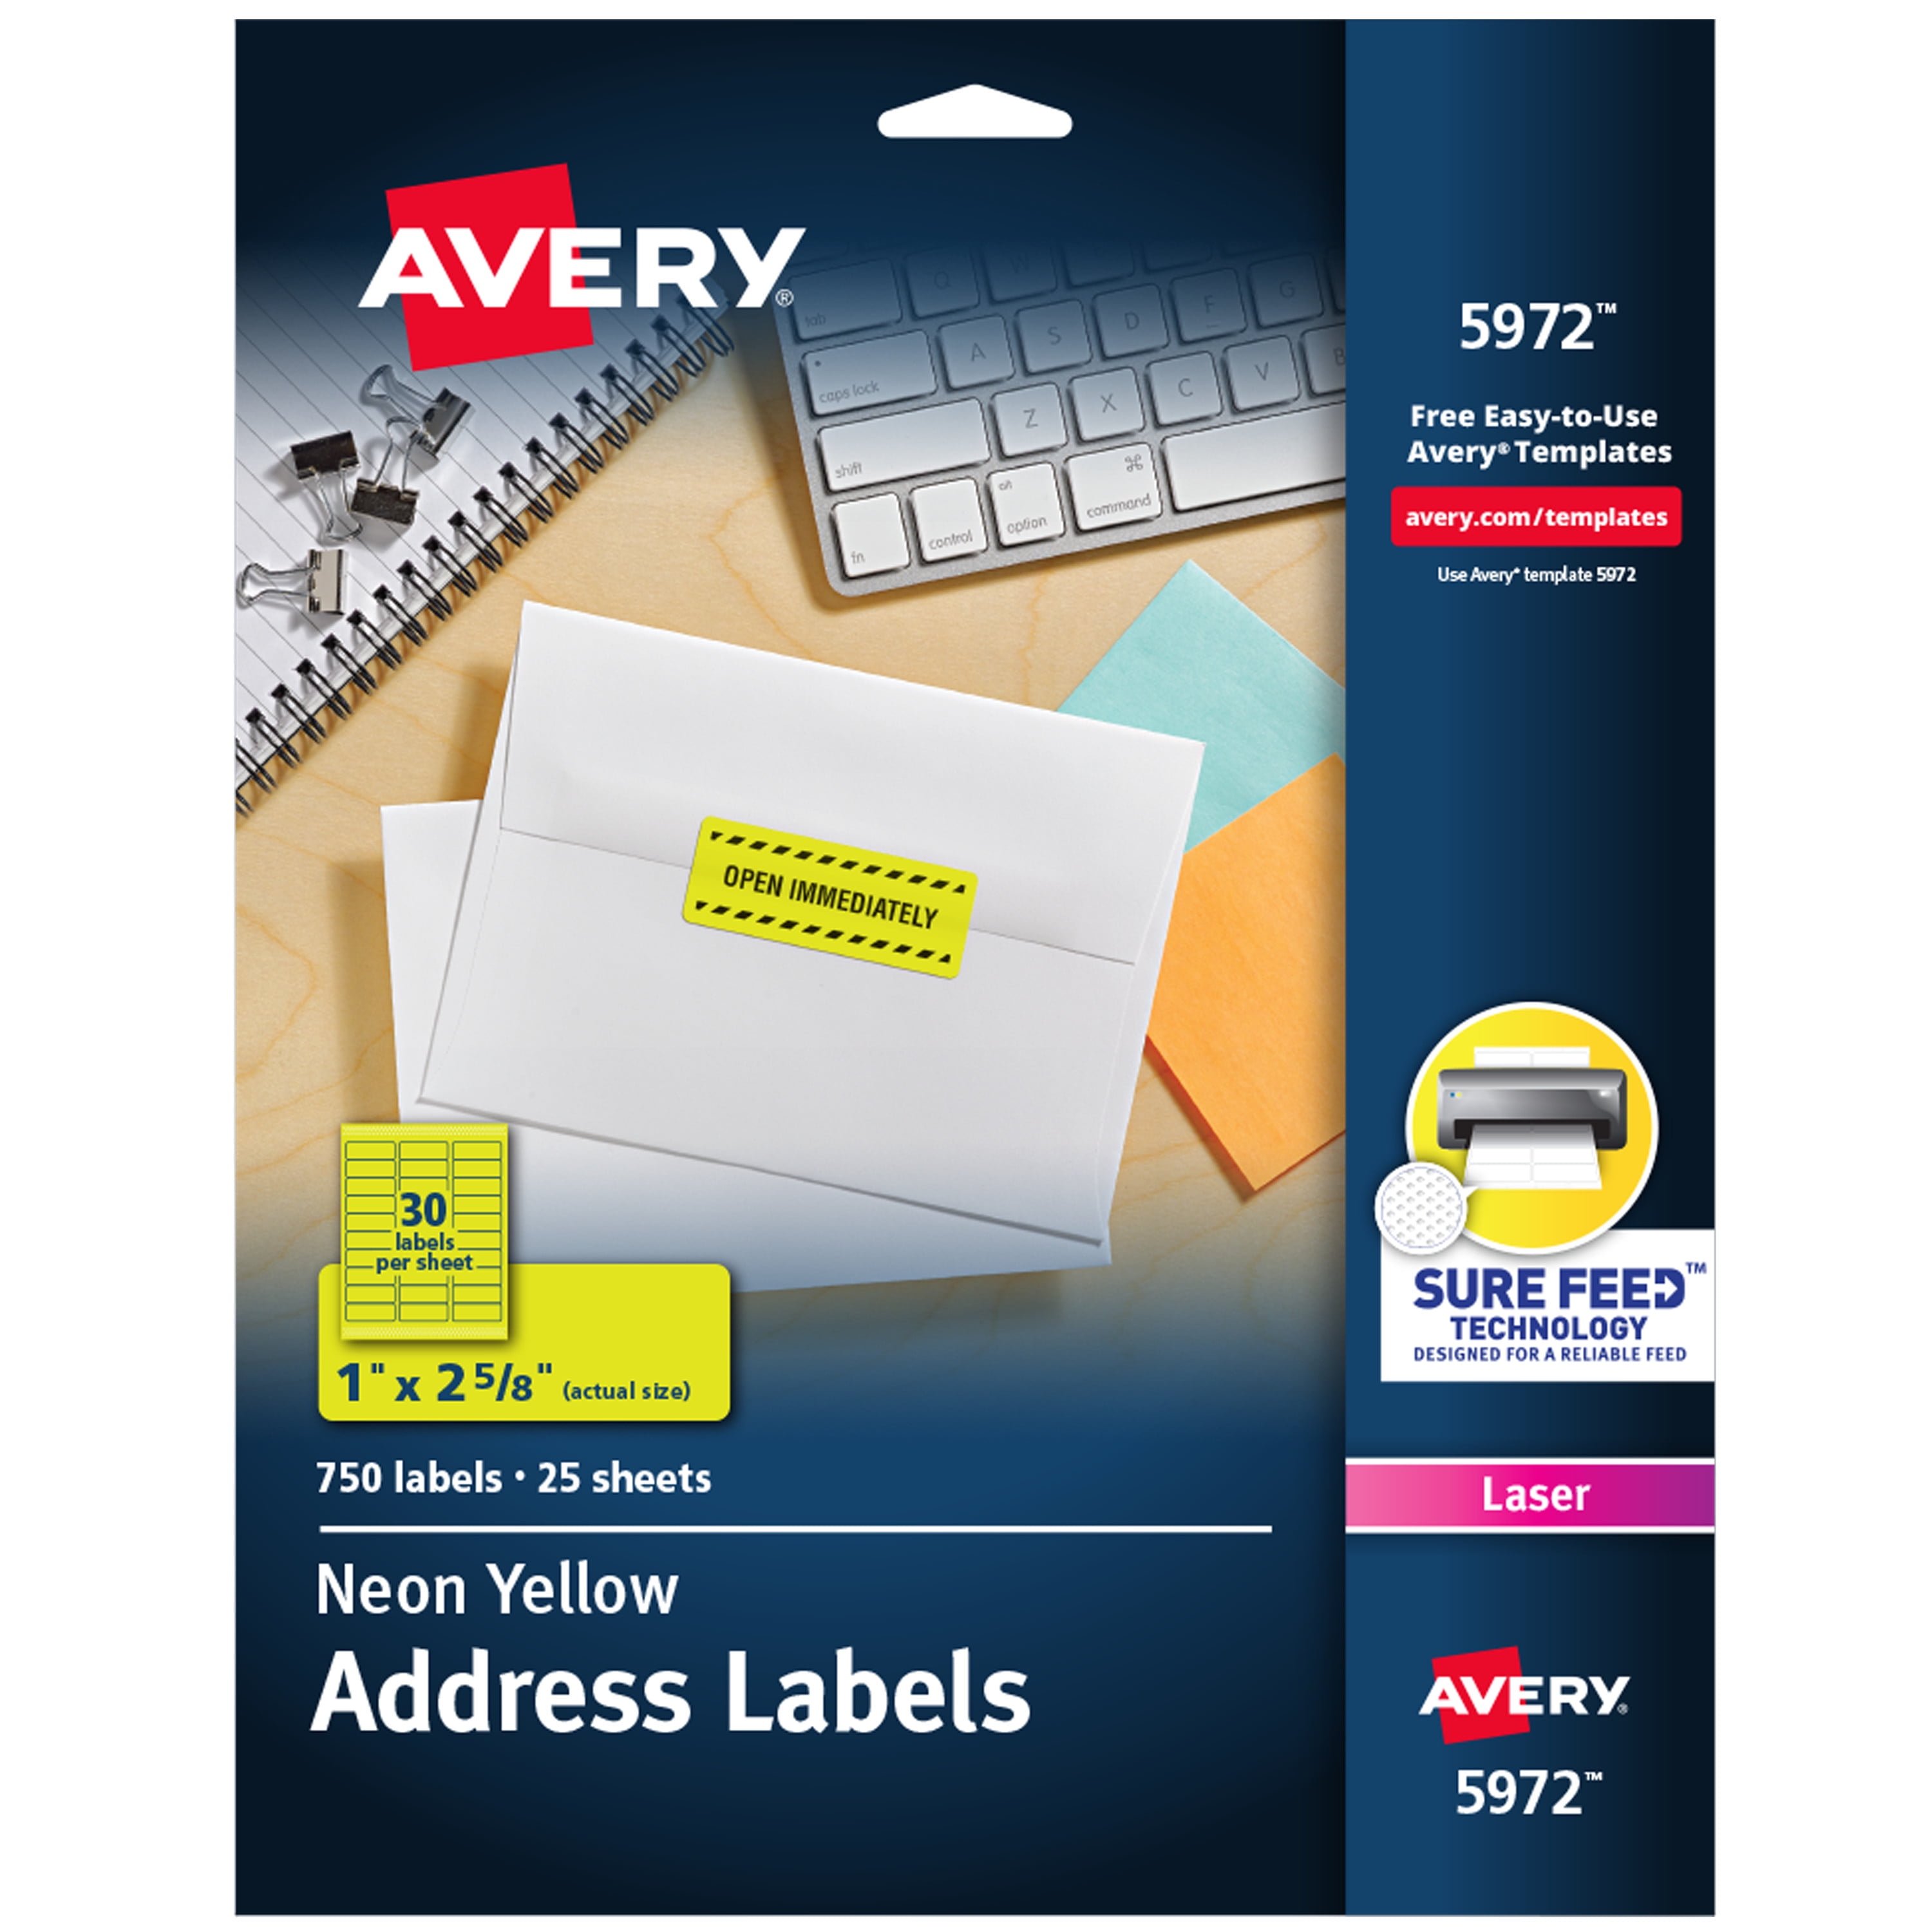 Avery High-visibility Neon Shipping Labels 500 4" Width X 2" Length Box